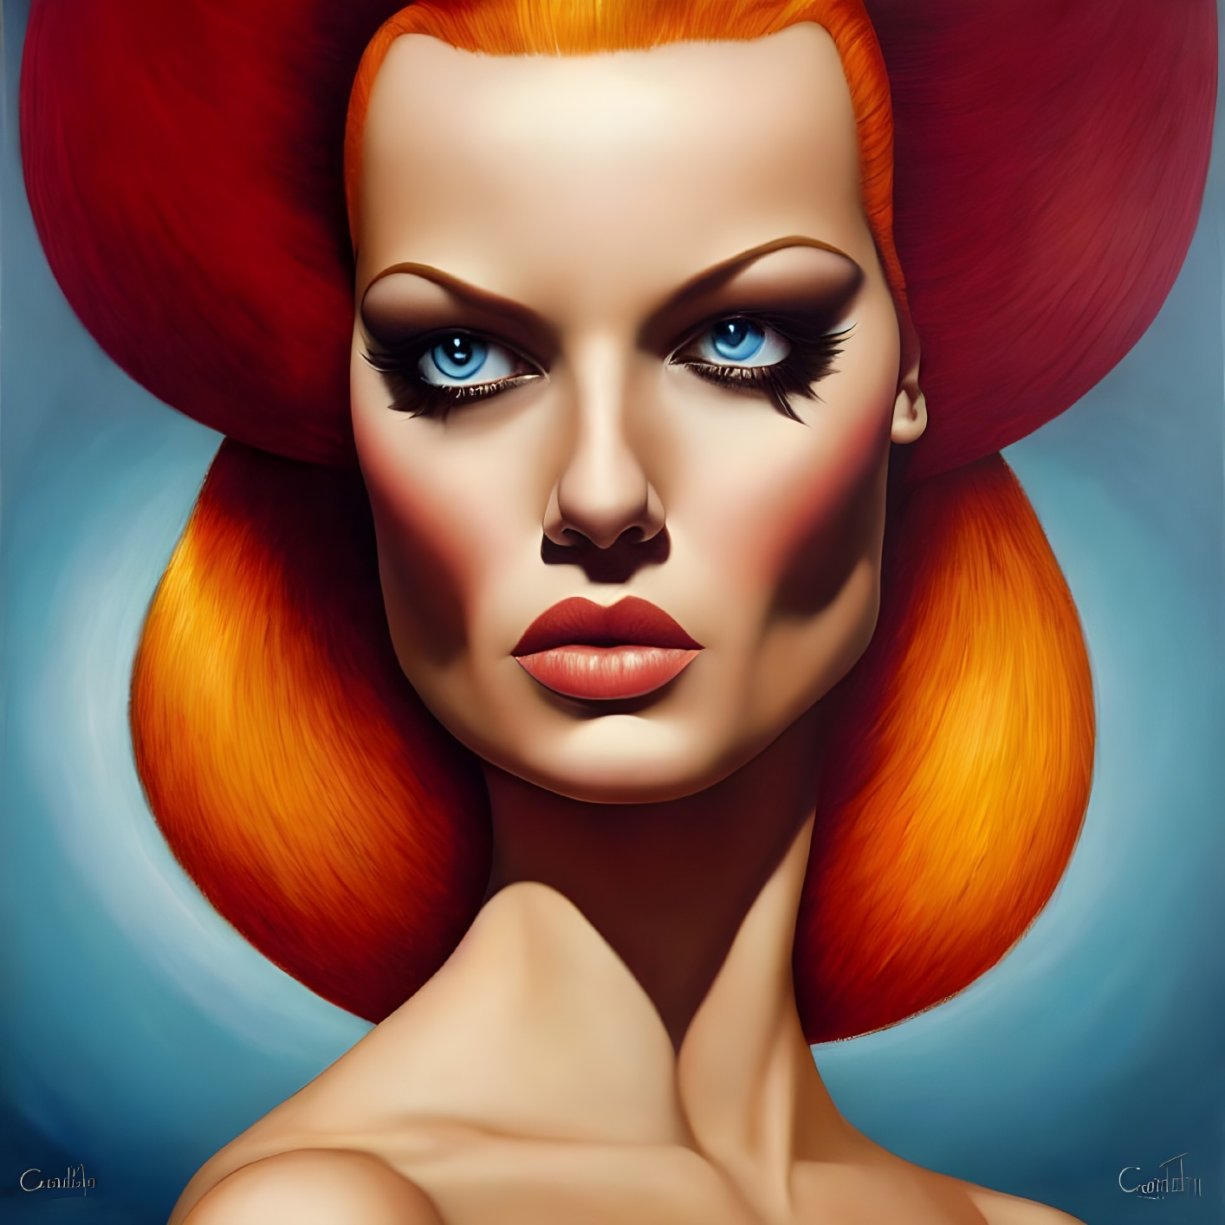 Stylized digital portrait of a woman with blue eyes and red hair